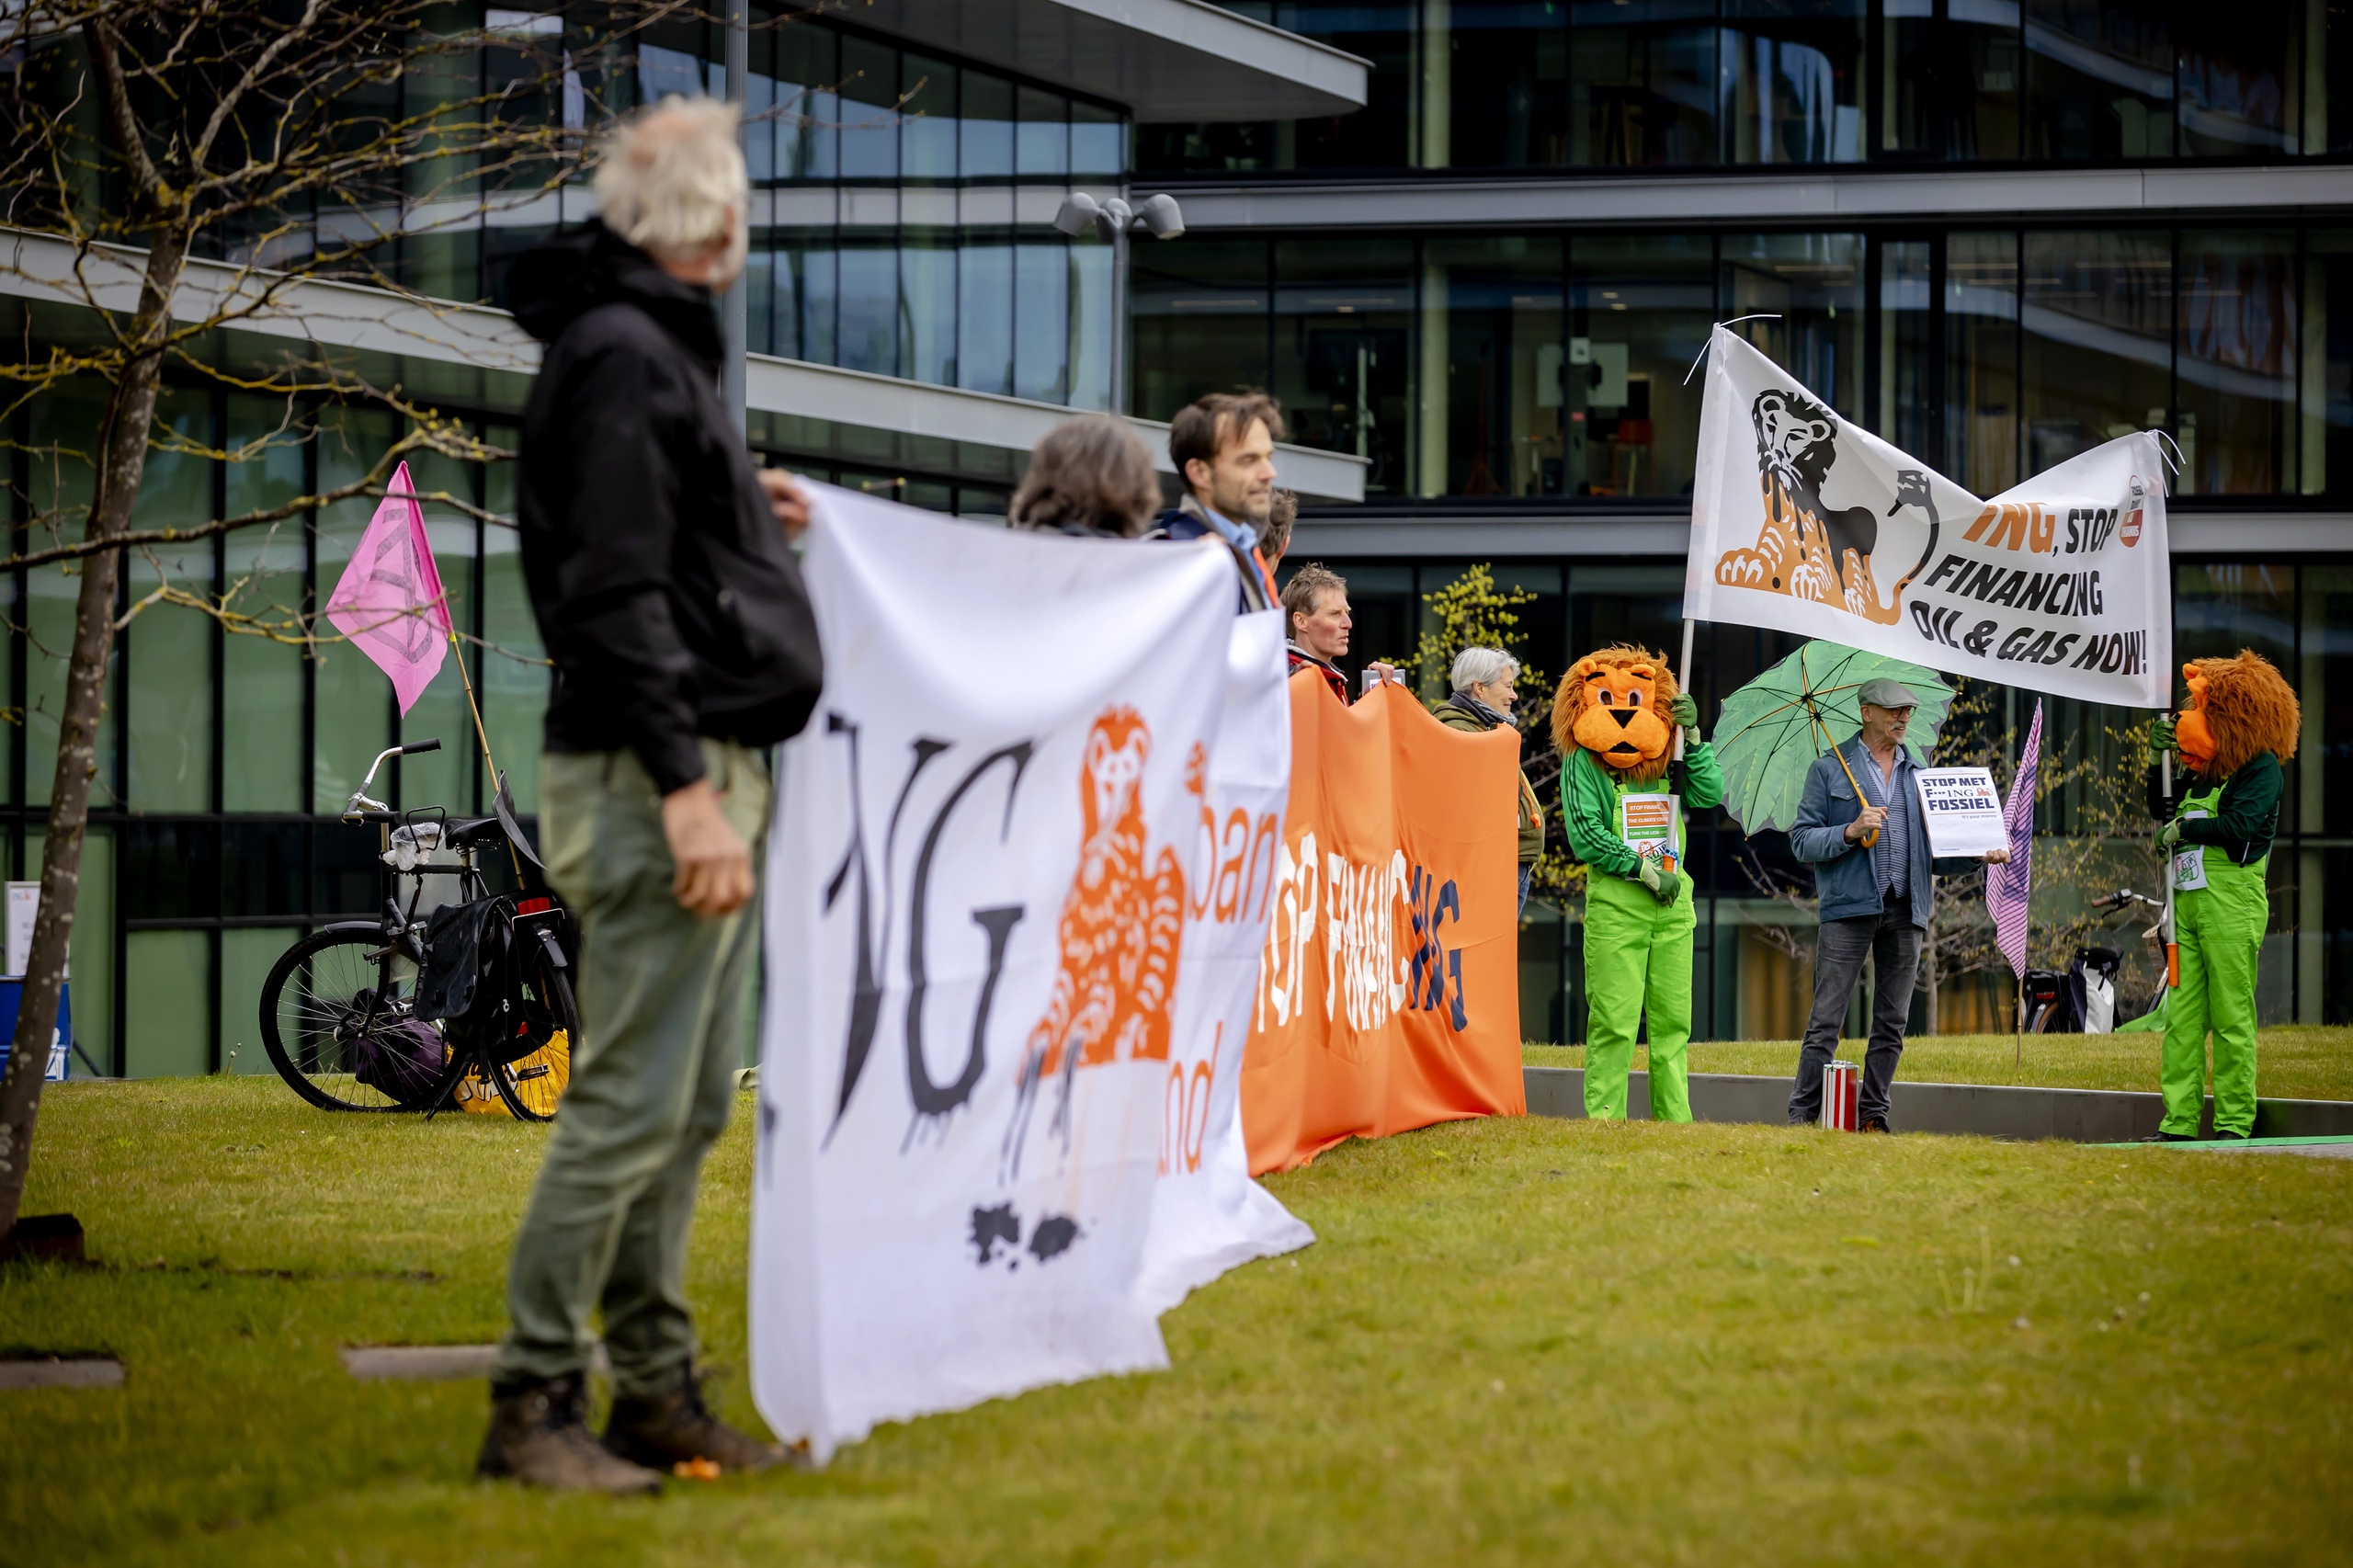 ING is forced to choose a larger location for its upcoming shareholders' meeting. 